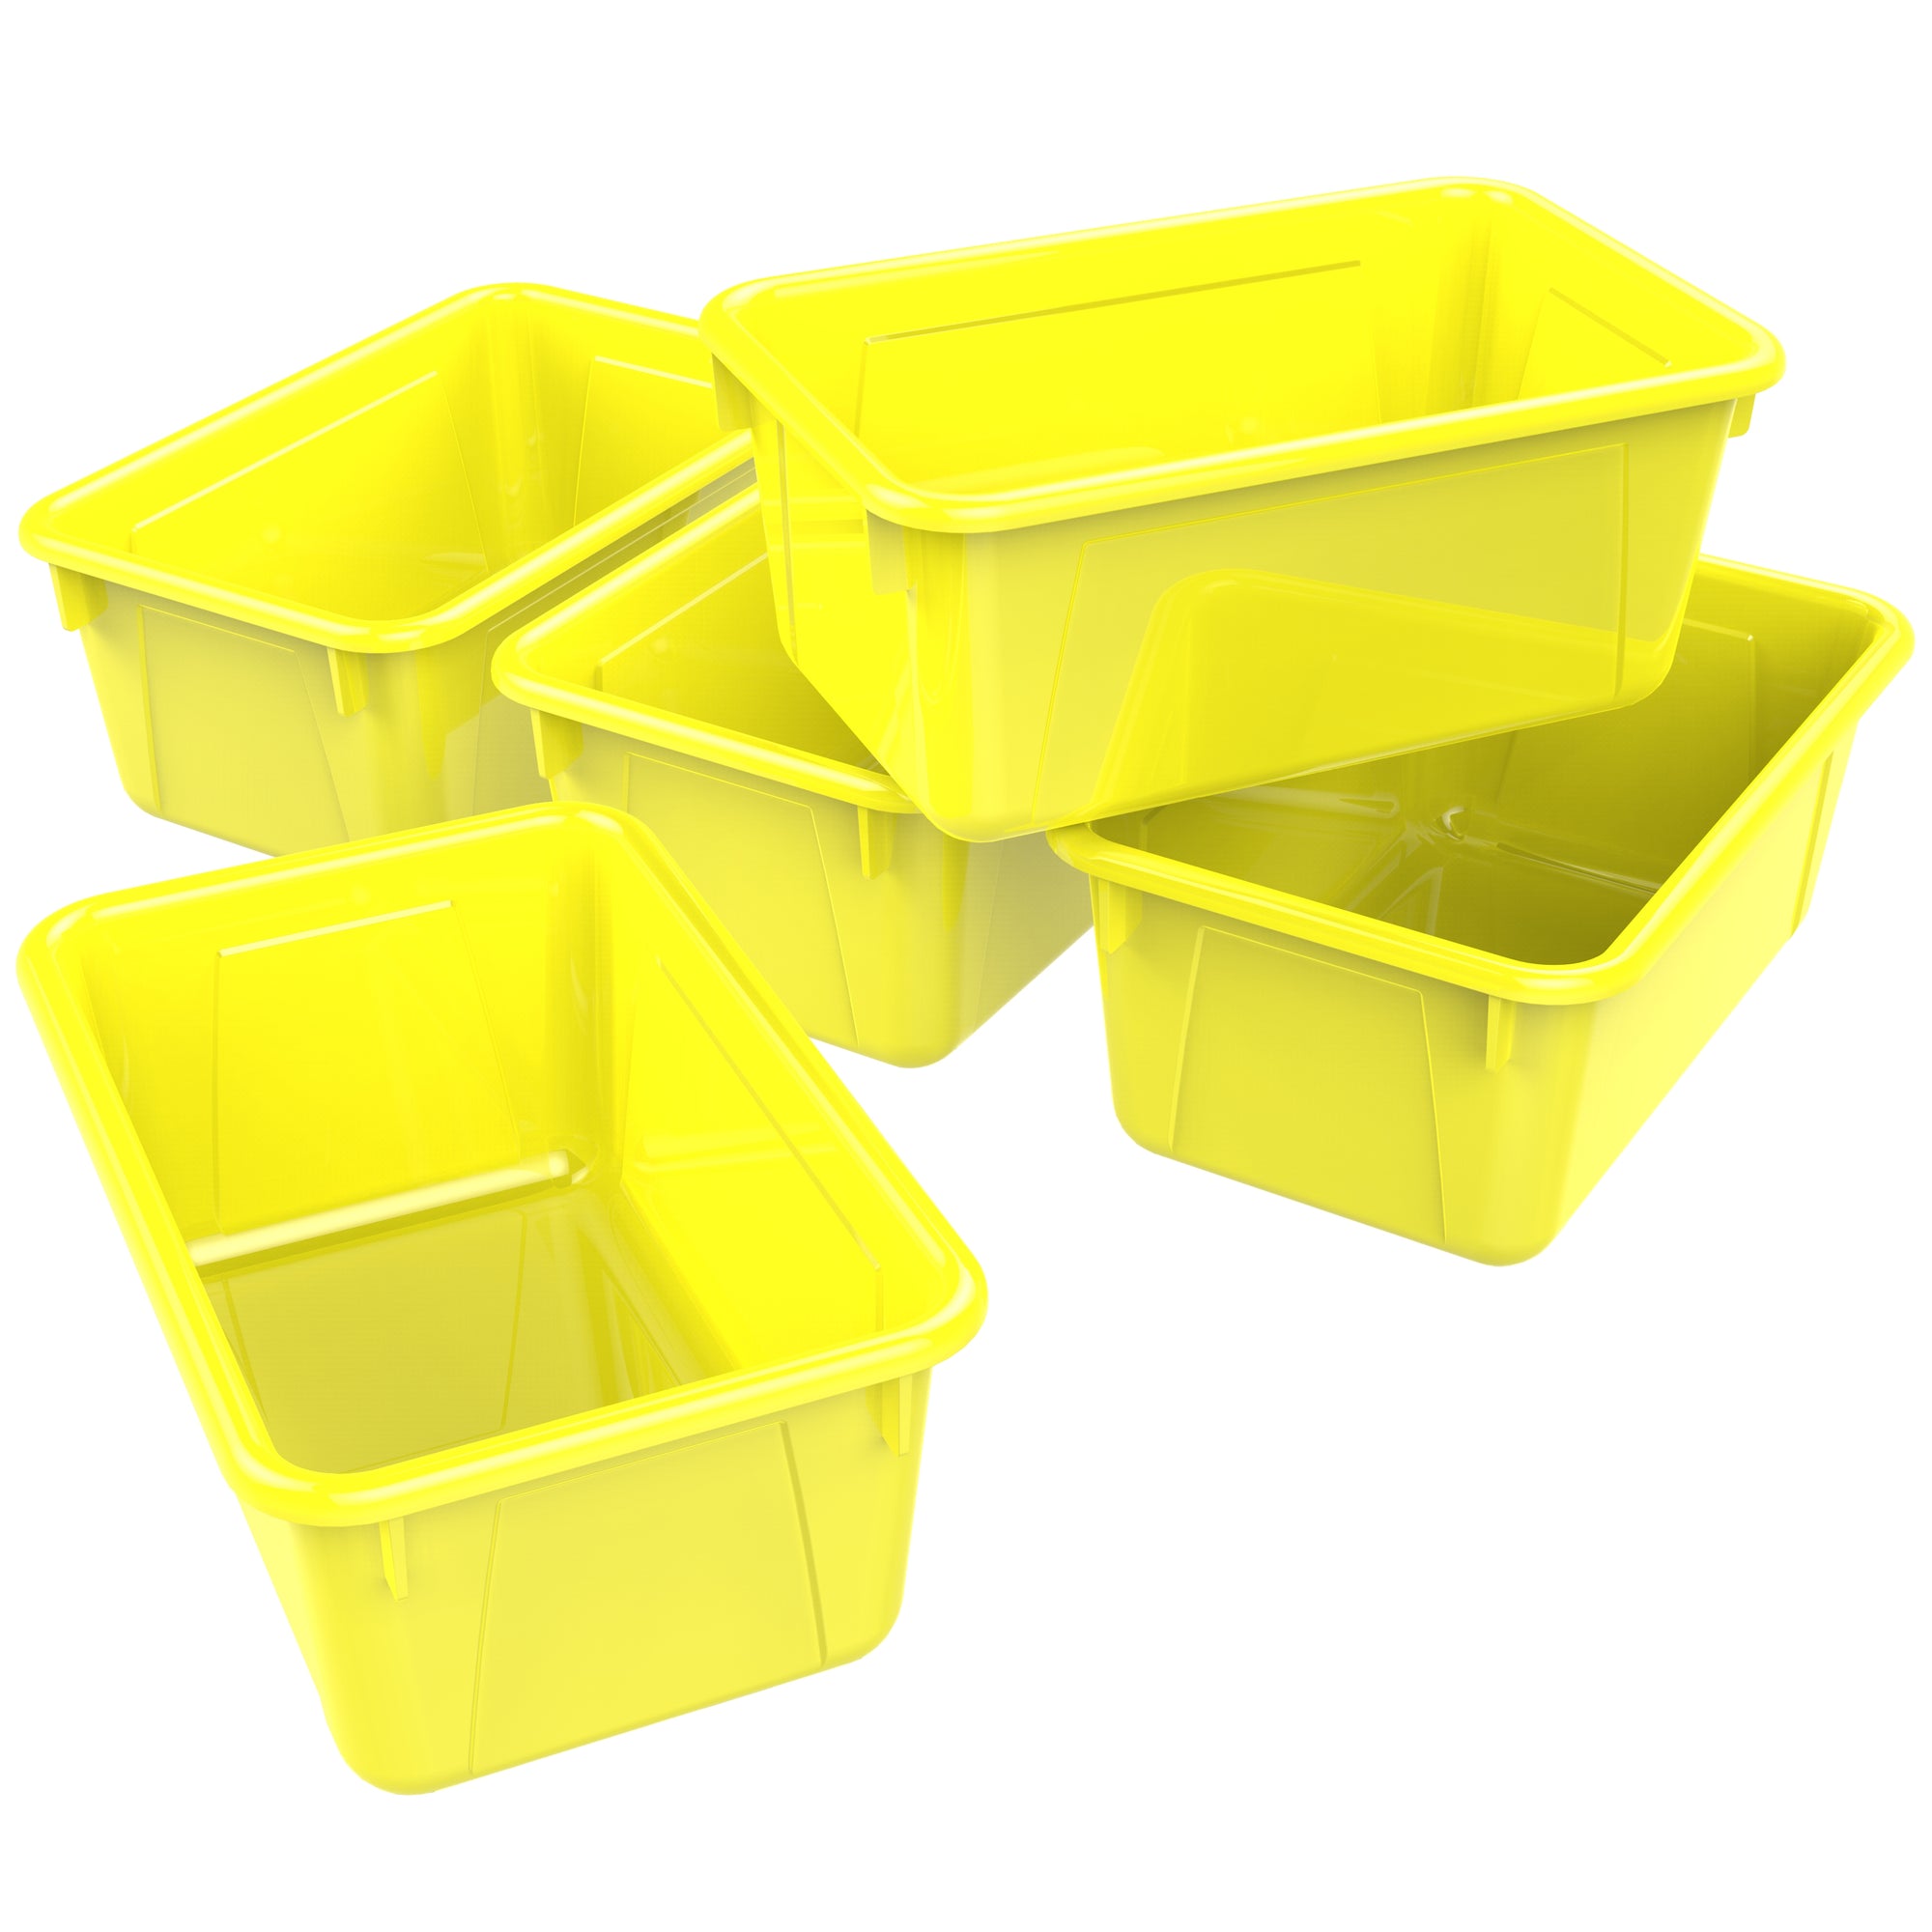 Small Cubby Bin ,Yellow (5 units/pack)